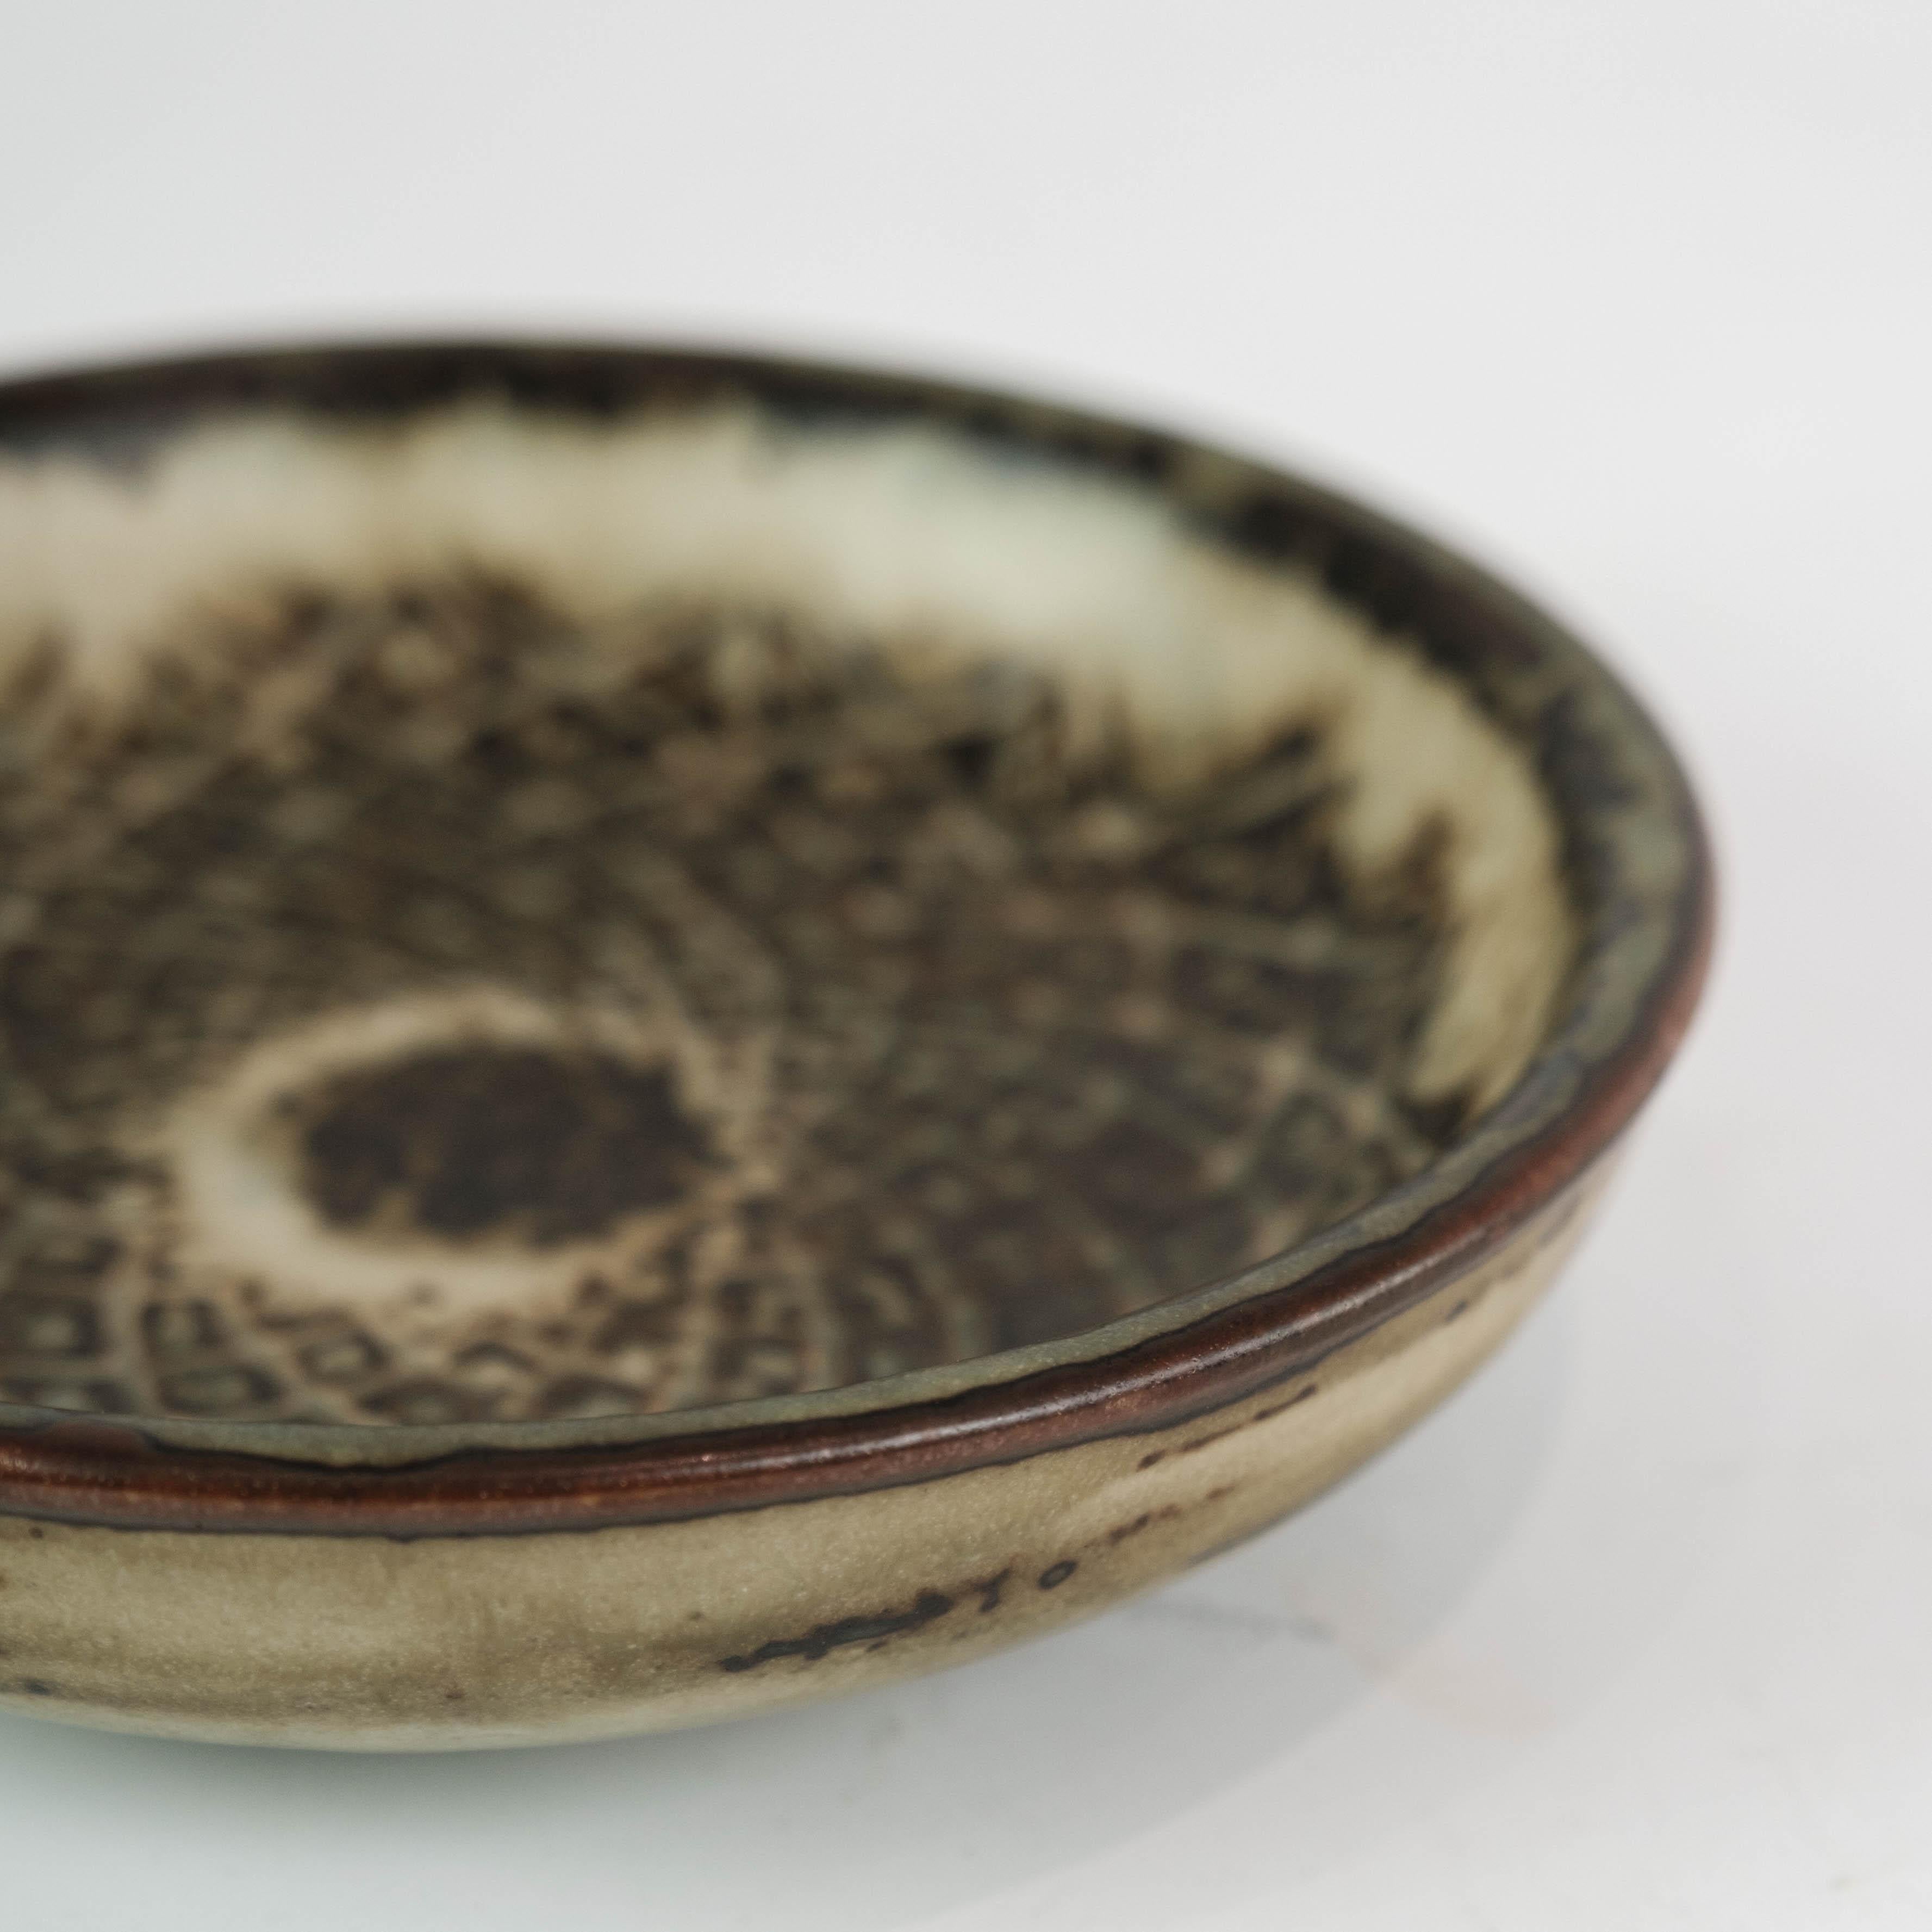 Ceramic Stoneware Bowl In Brown Colors No. 21567 By Gerd Bøgelund From 1960s For Sale